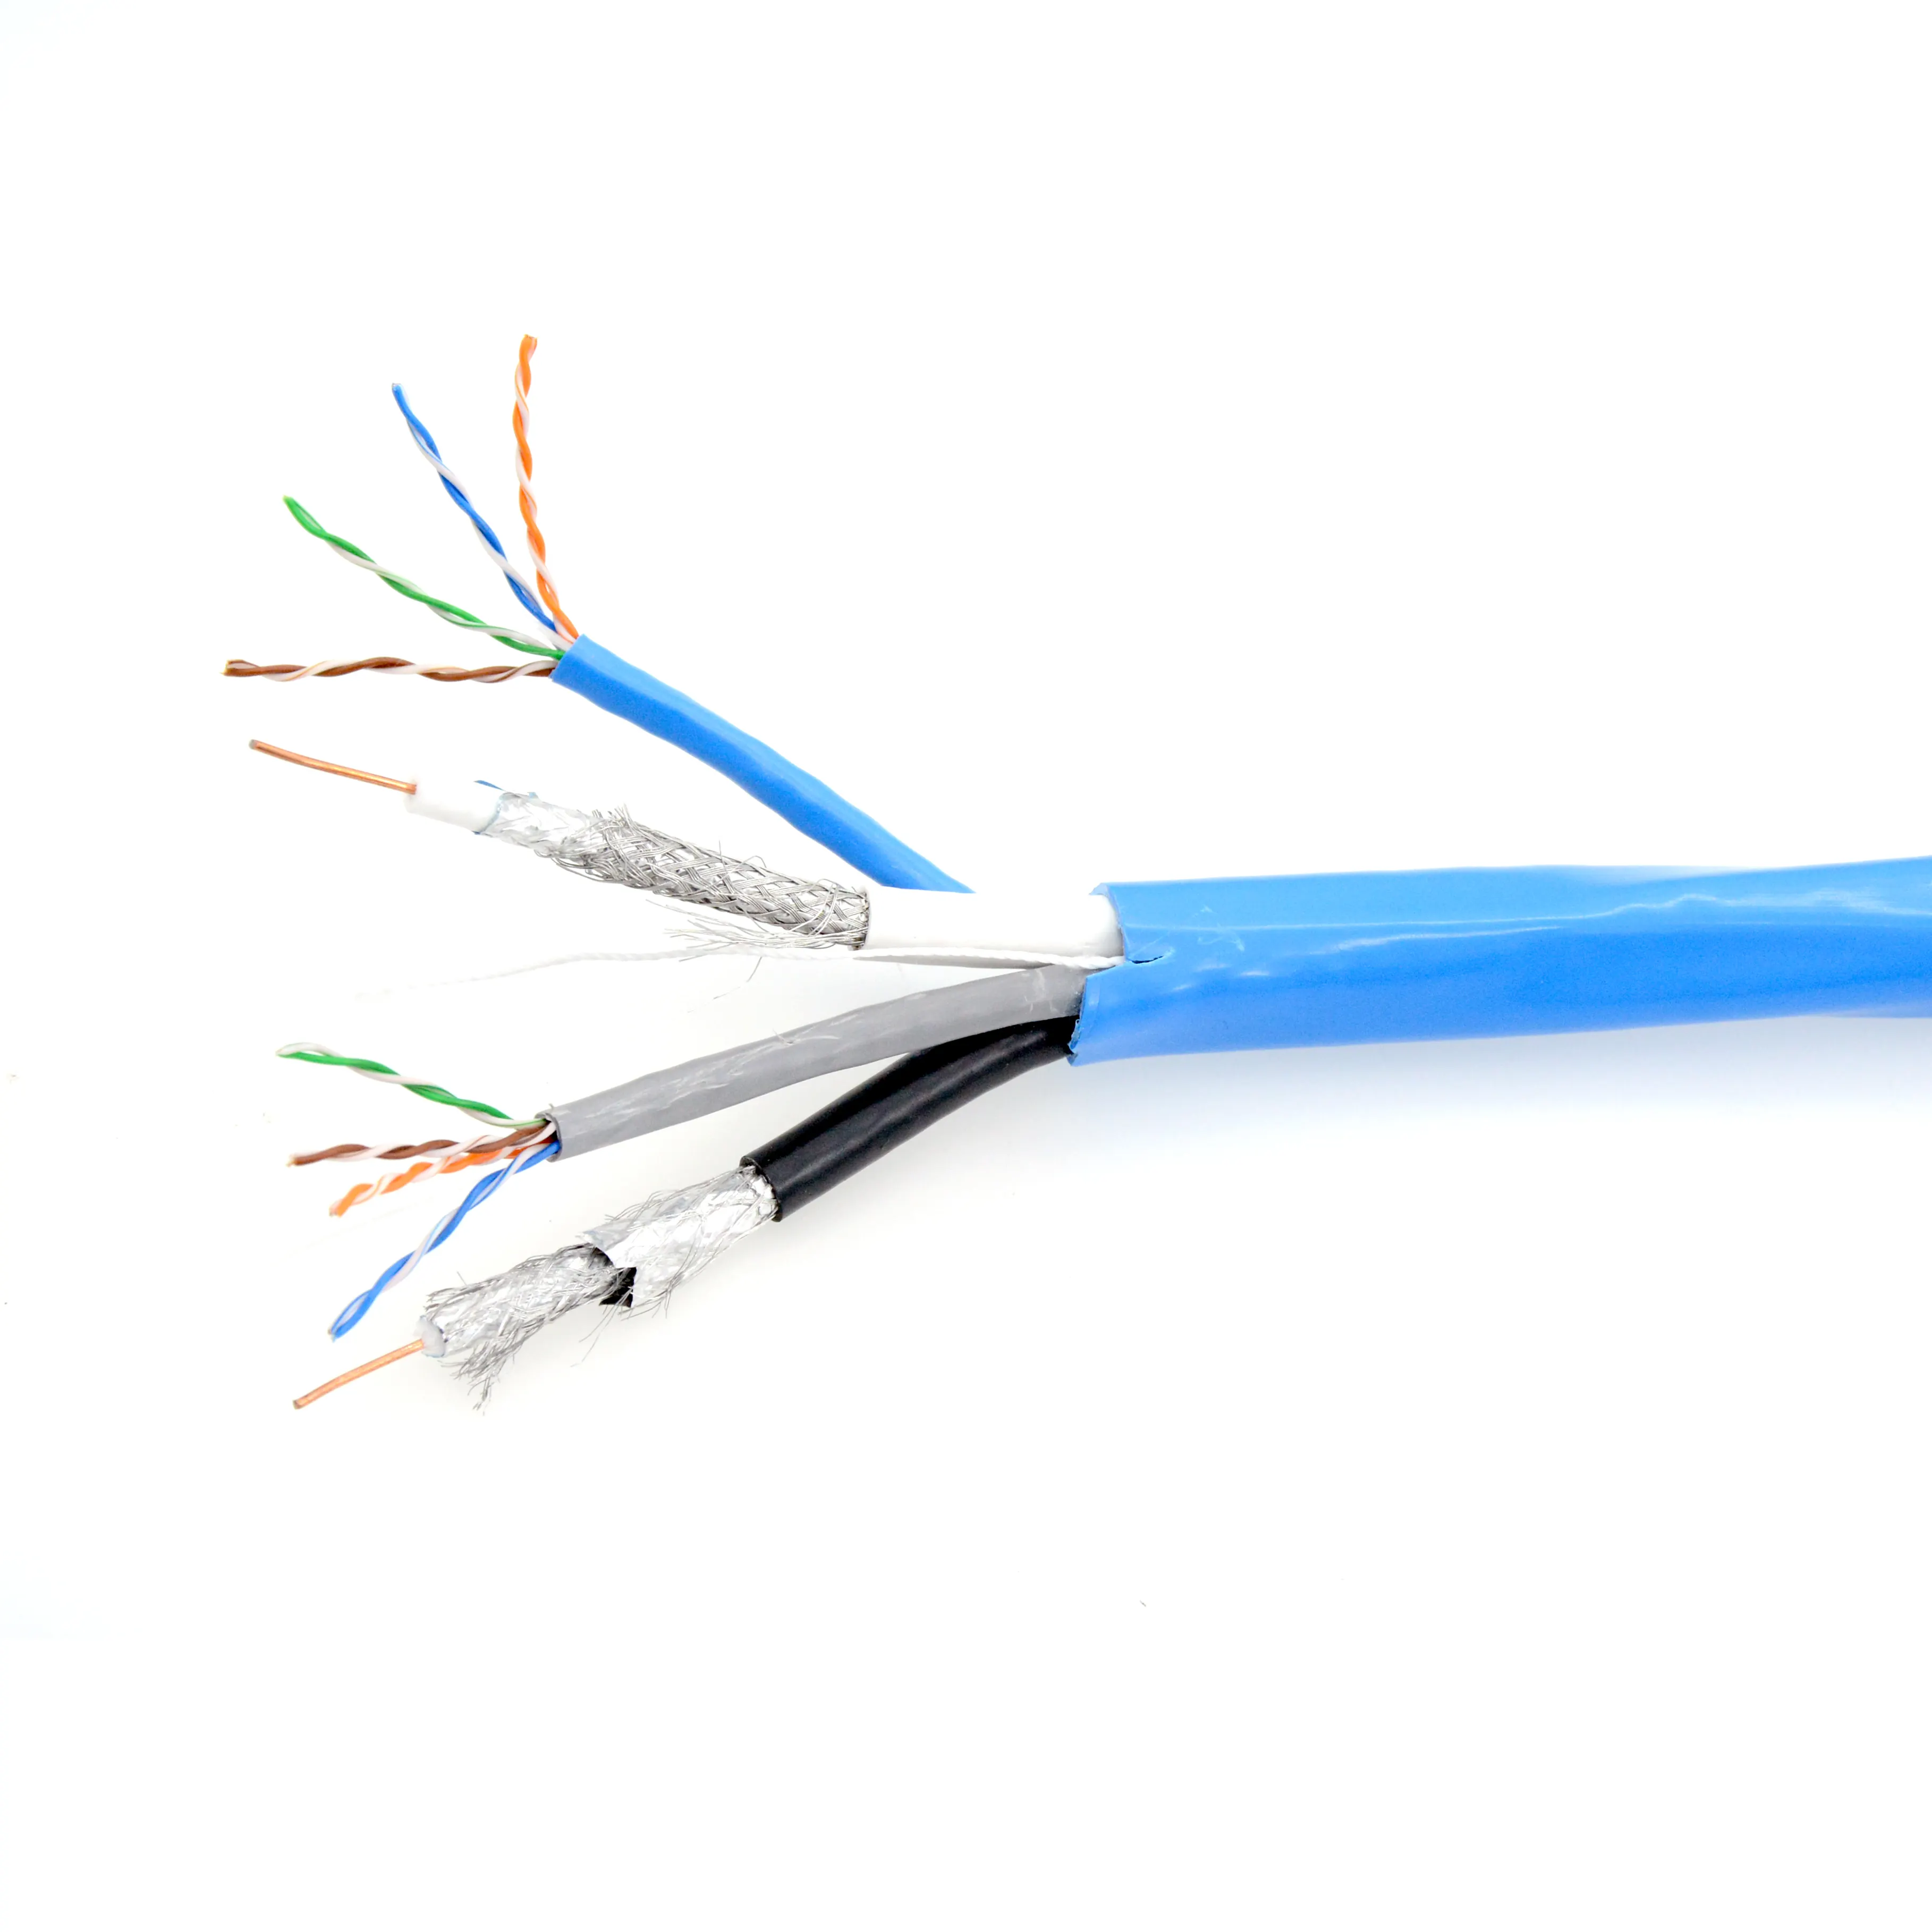 Lan Cable With 2 RG6 + 2 Cat6 Composite Hybrid Cable